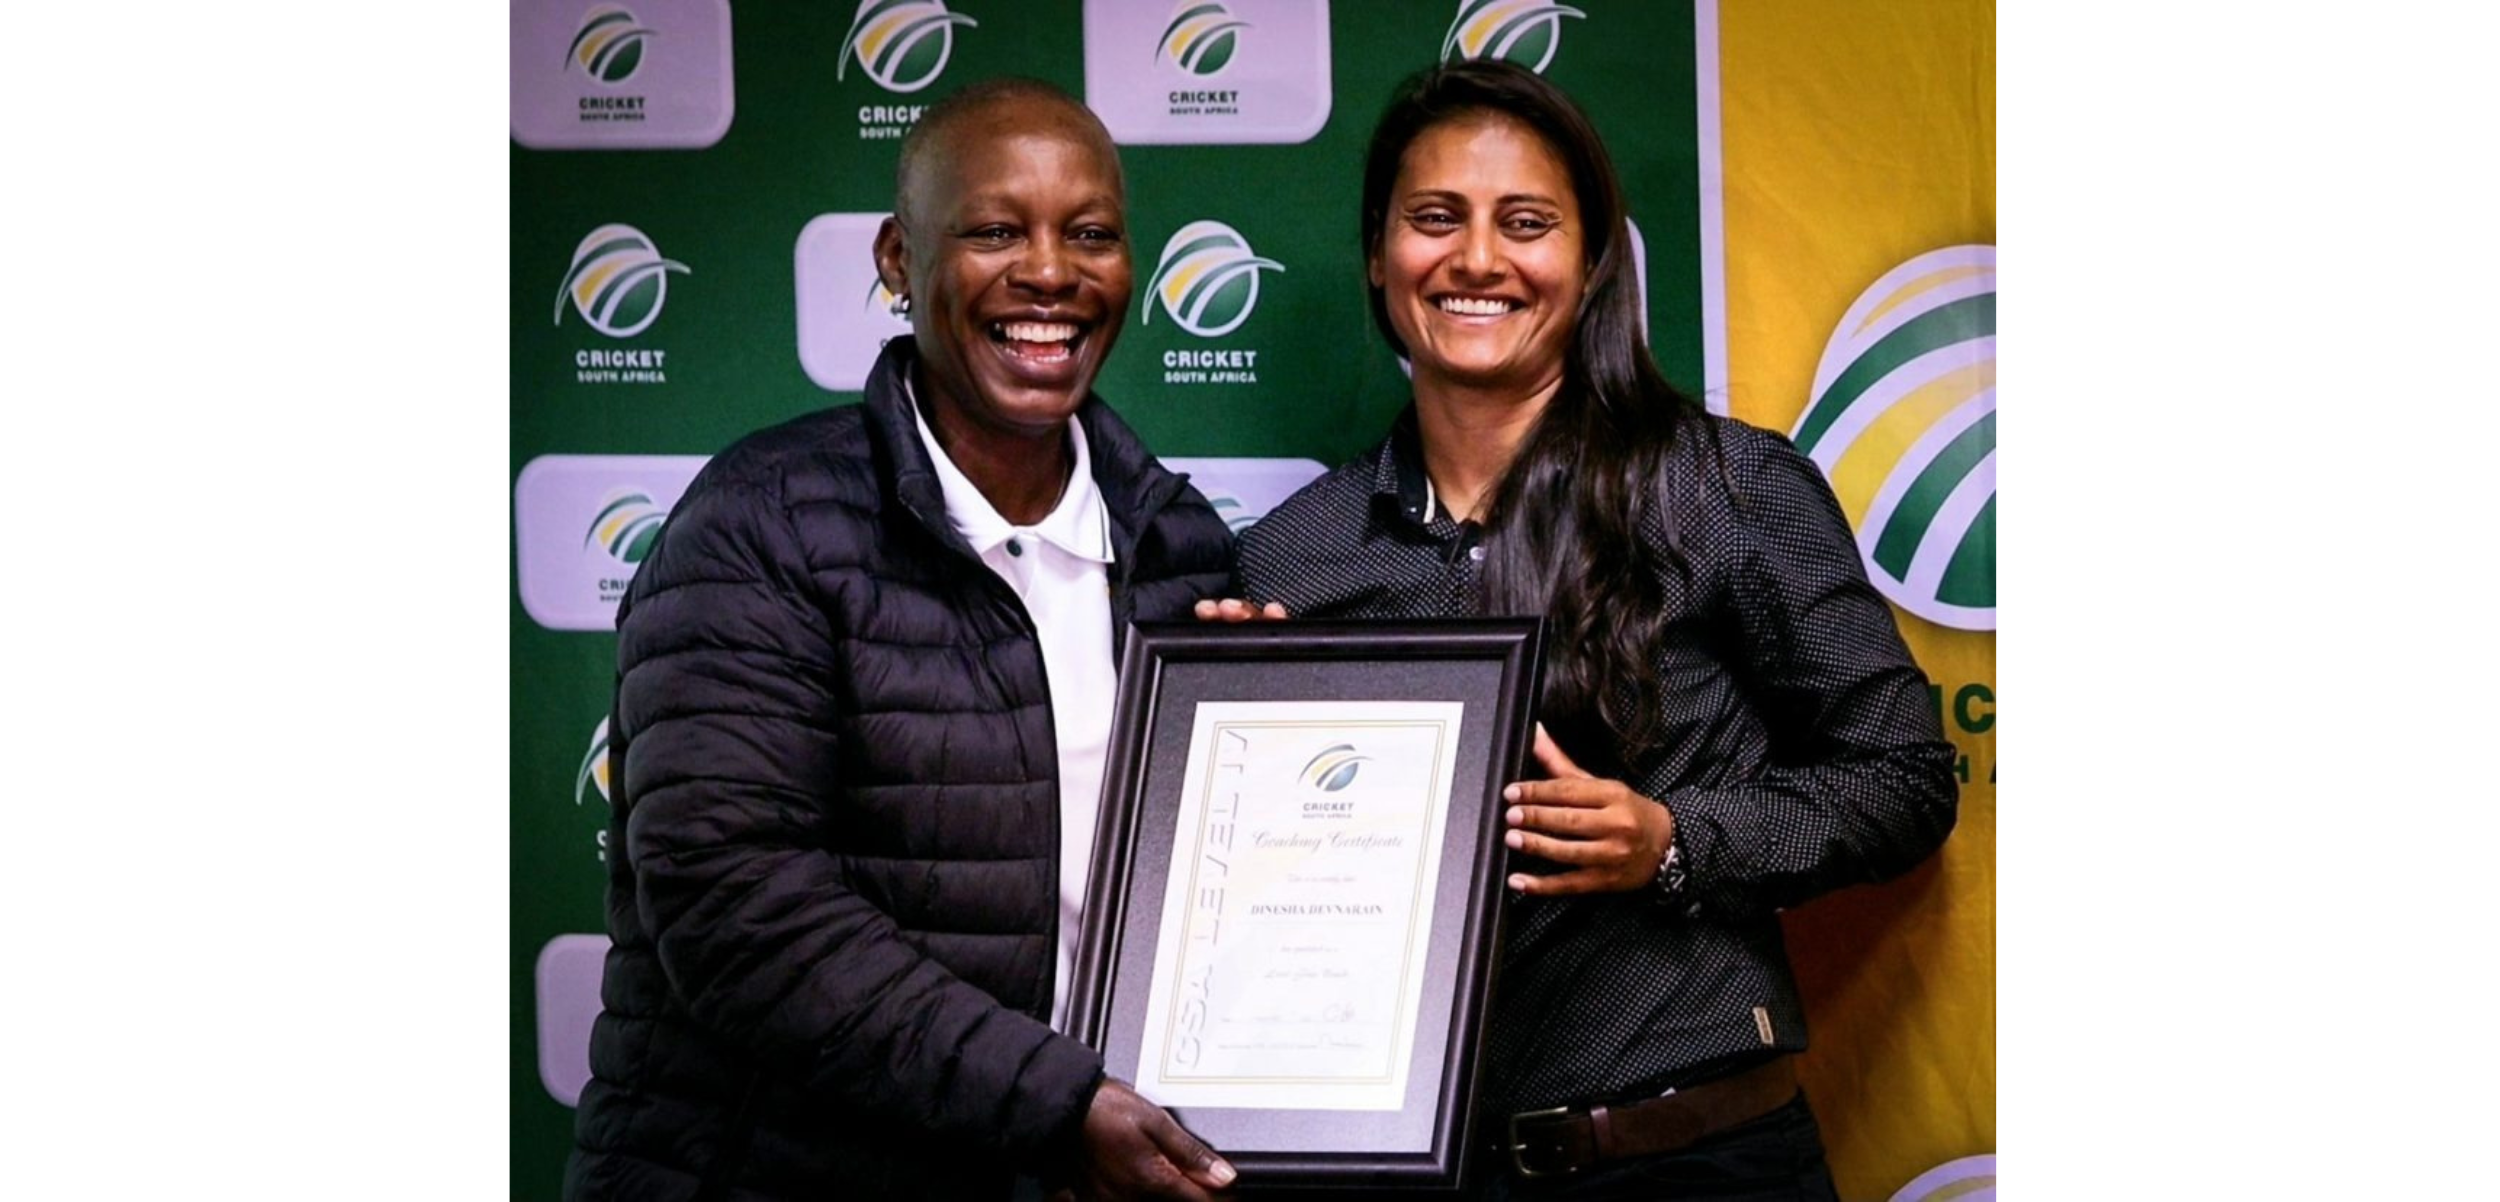 Devnarain reflects on an incredible journey - The first CSA female coach to acquire a level 4 coaching certificate